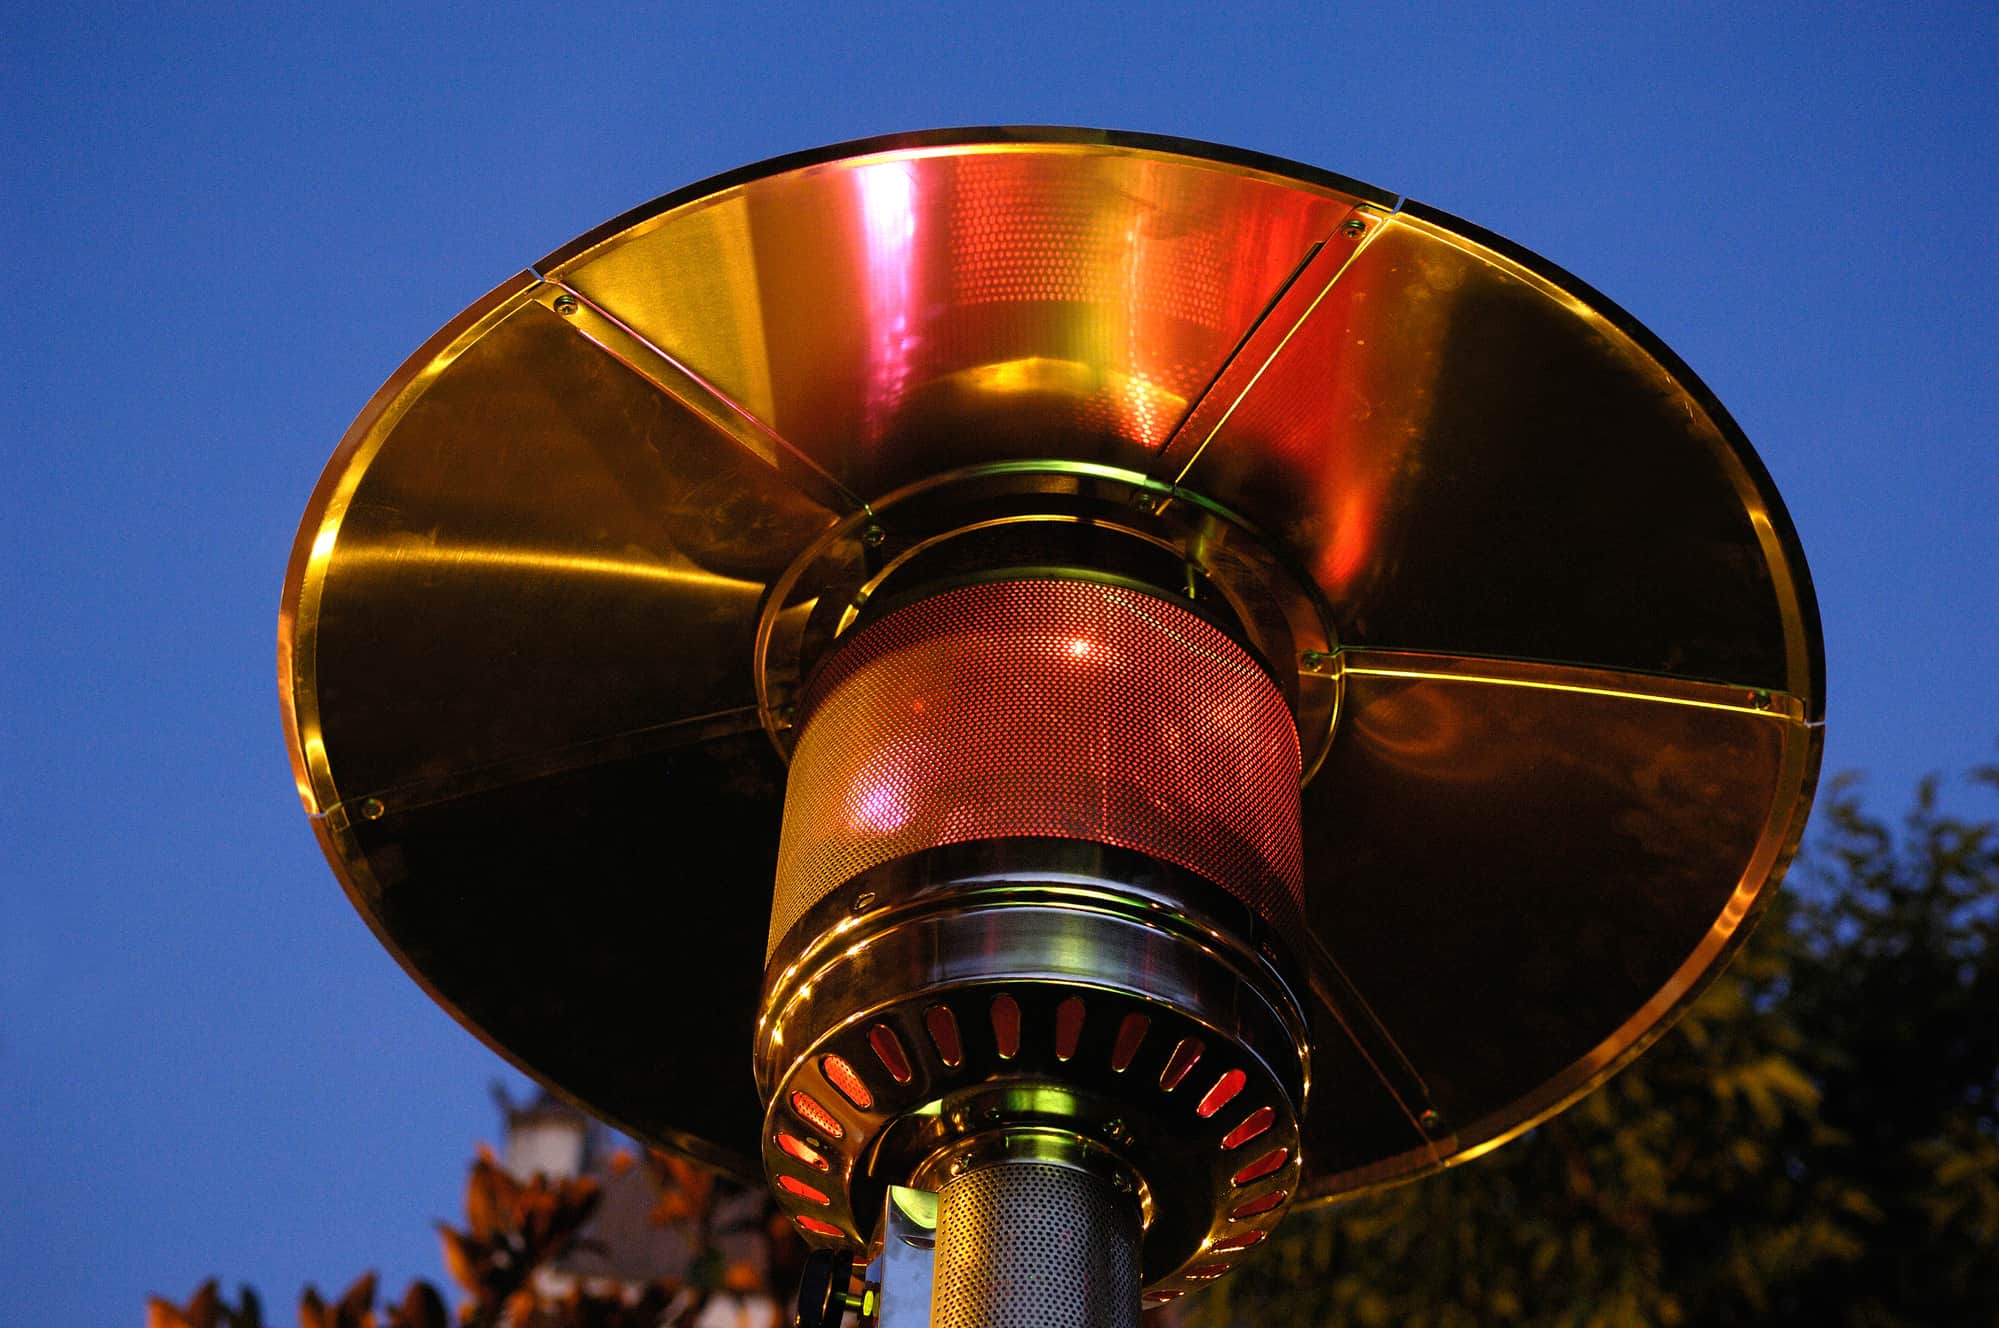 The Best Outdoor Patio Heaters with Wheels